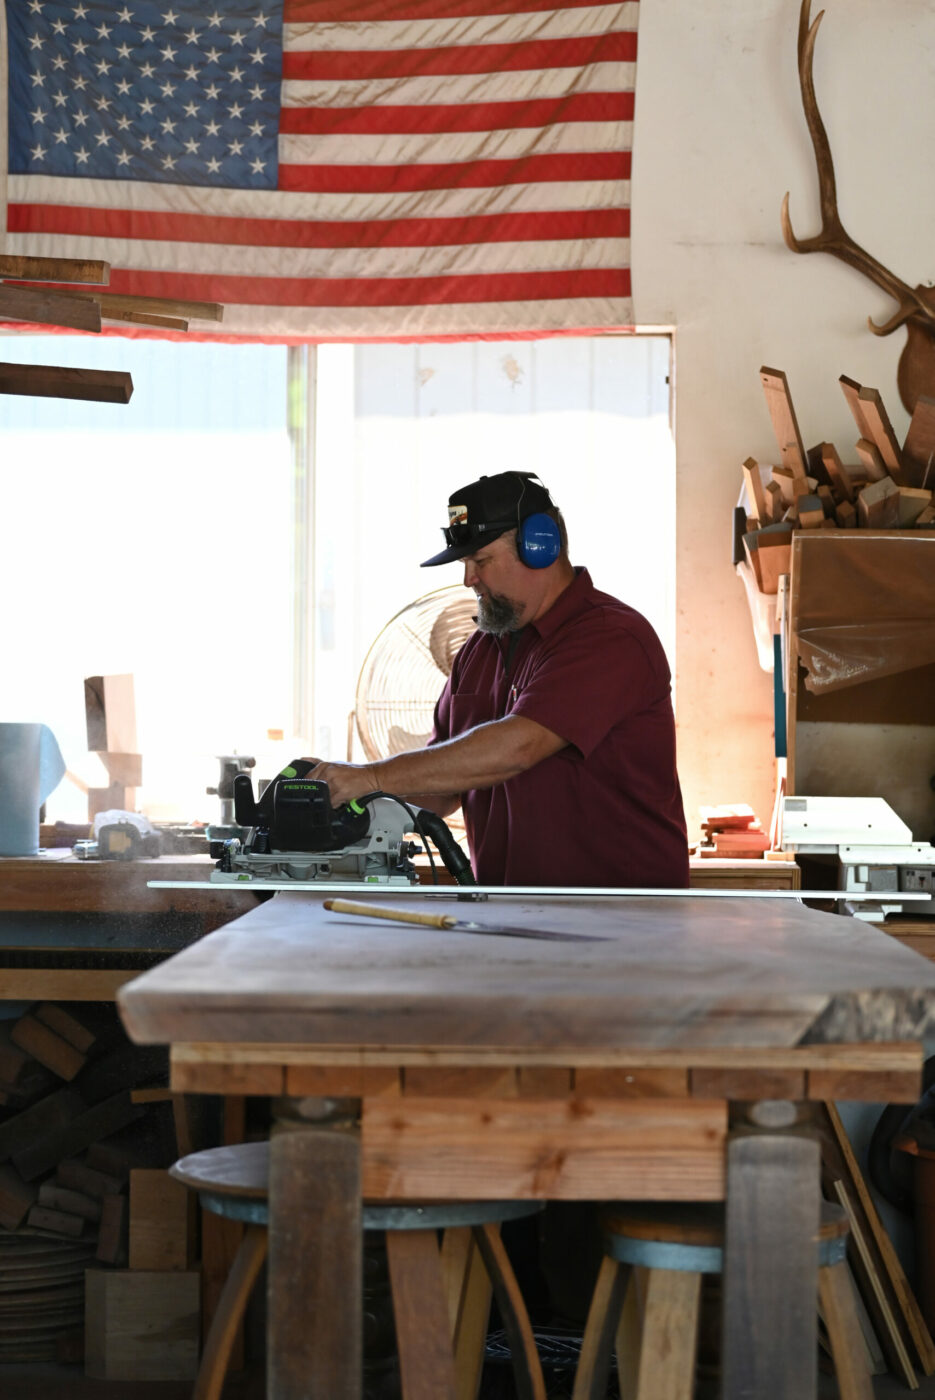 The former heavy-equipment operator started working on wood projects as a child, starting with simple tables and moving on to carved skimboards for his friends. He started selling his designs at farmers markets in 2011.